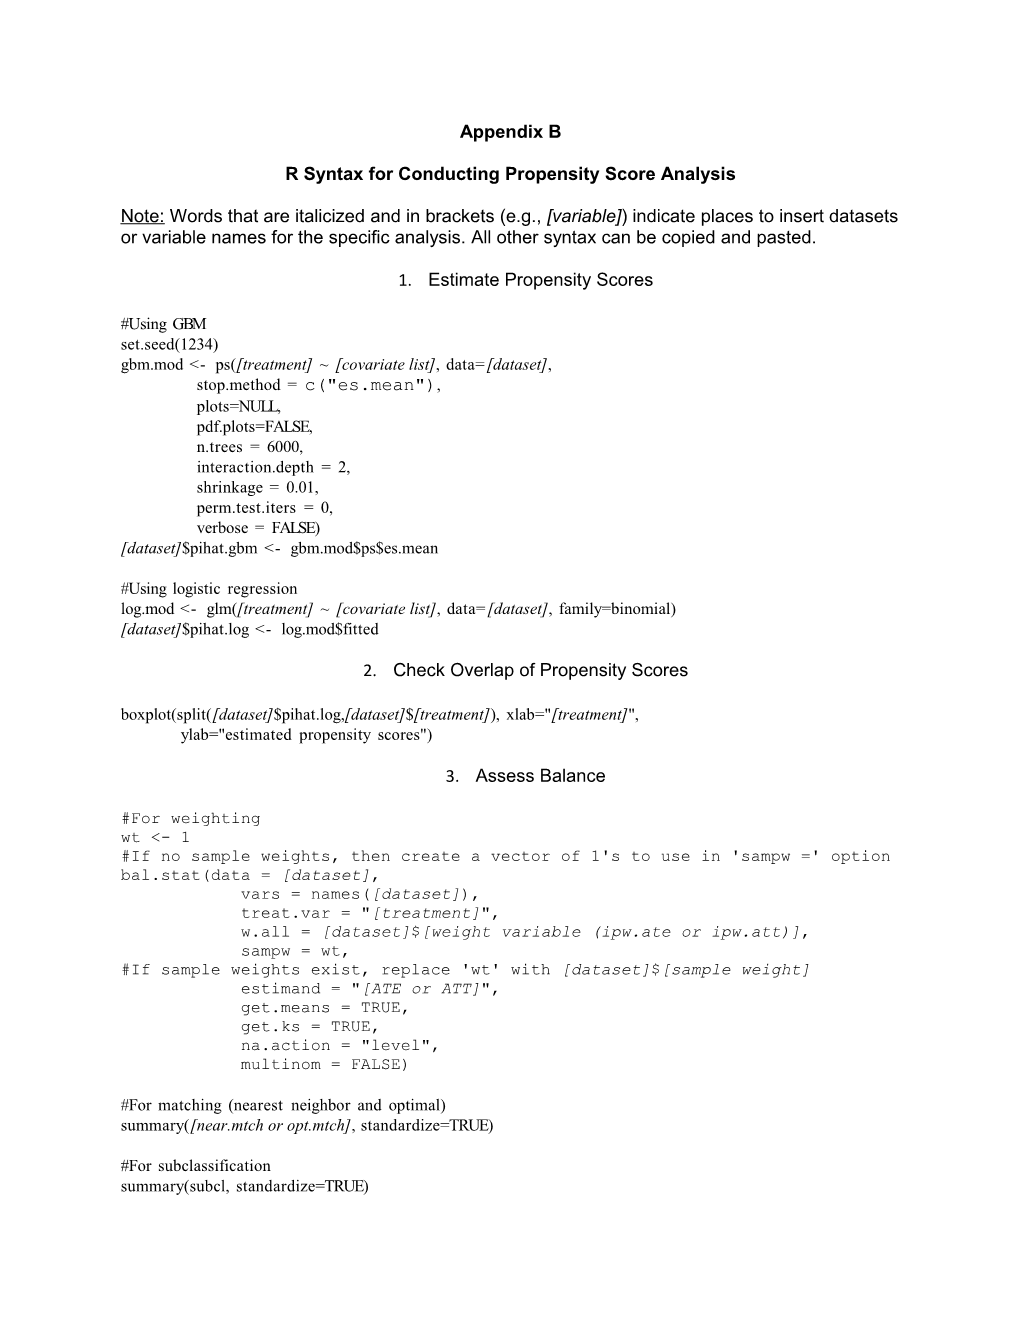 R Syntax for Conducting Propensity Score Analysis